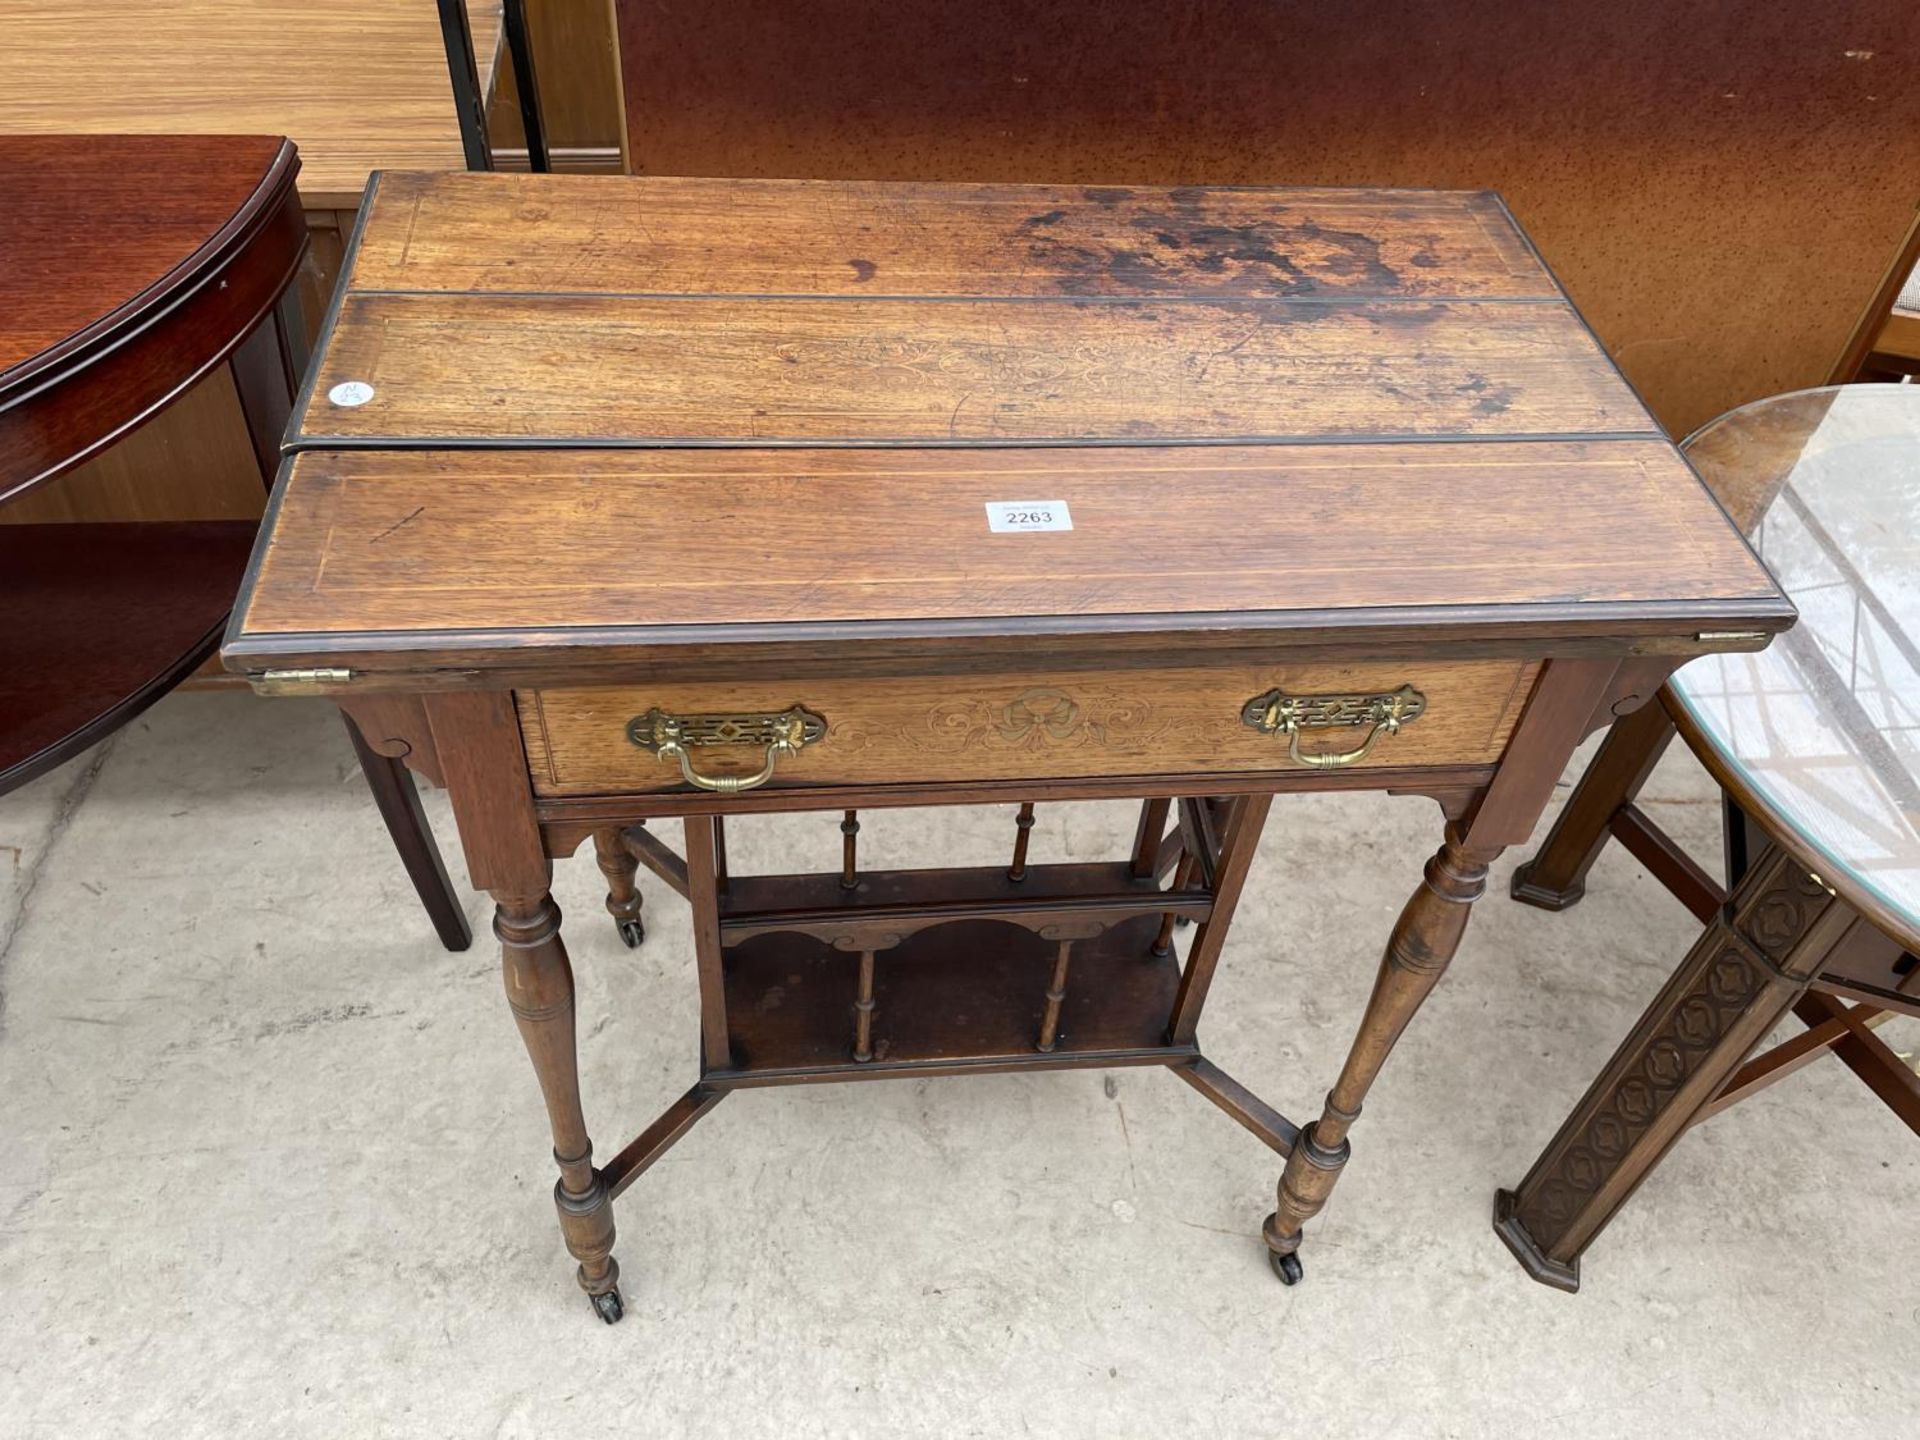 AN EDWARDIAN MAHOGANY AND INLAID FOLD OVER WRITING TABLE STAMPED J.A.S. SHOOLBRED & CO, 27" WIDE - Image 5 of 7